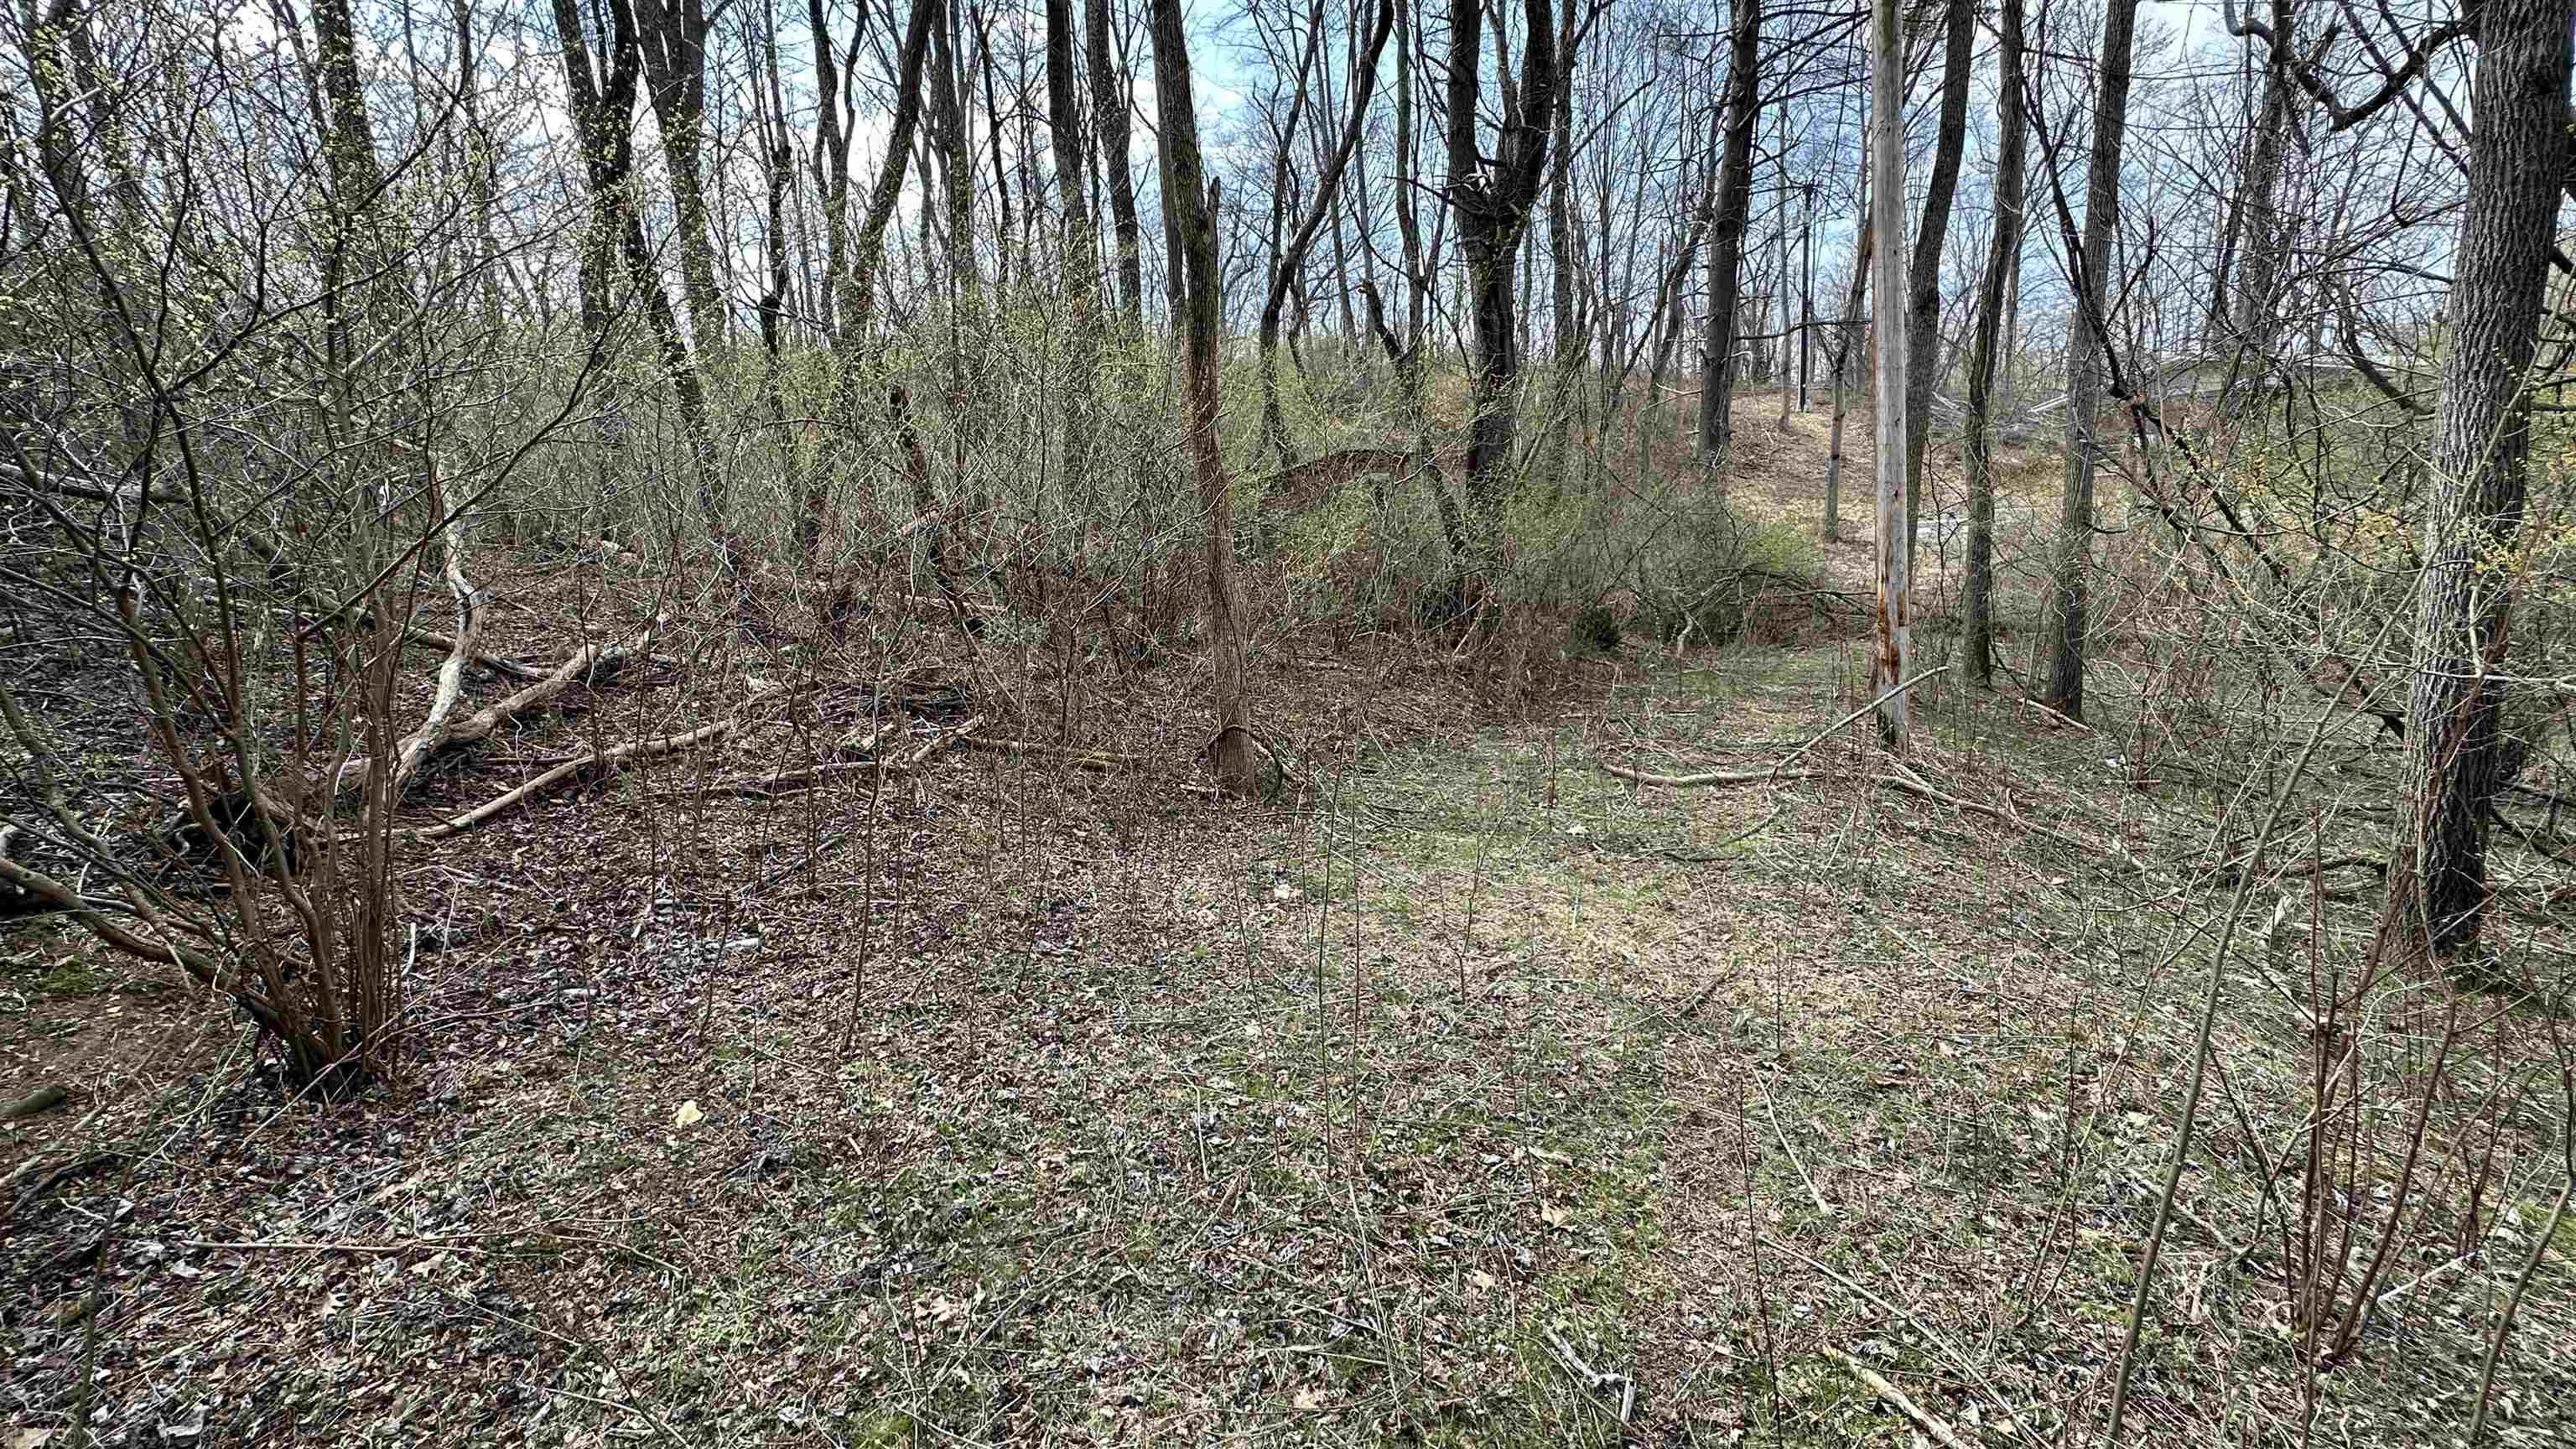 3.723 acre lot in the Belview area of Montgomery County. Convenient to Radford and Christiansburg, Zoned A1/Agriculture.